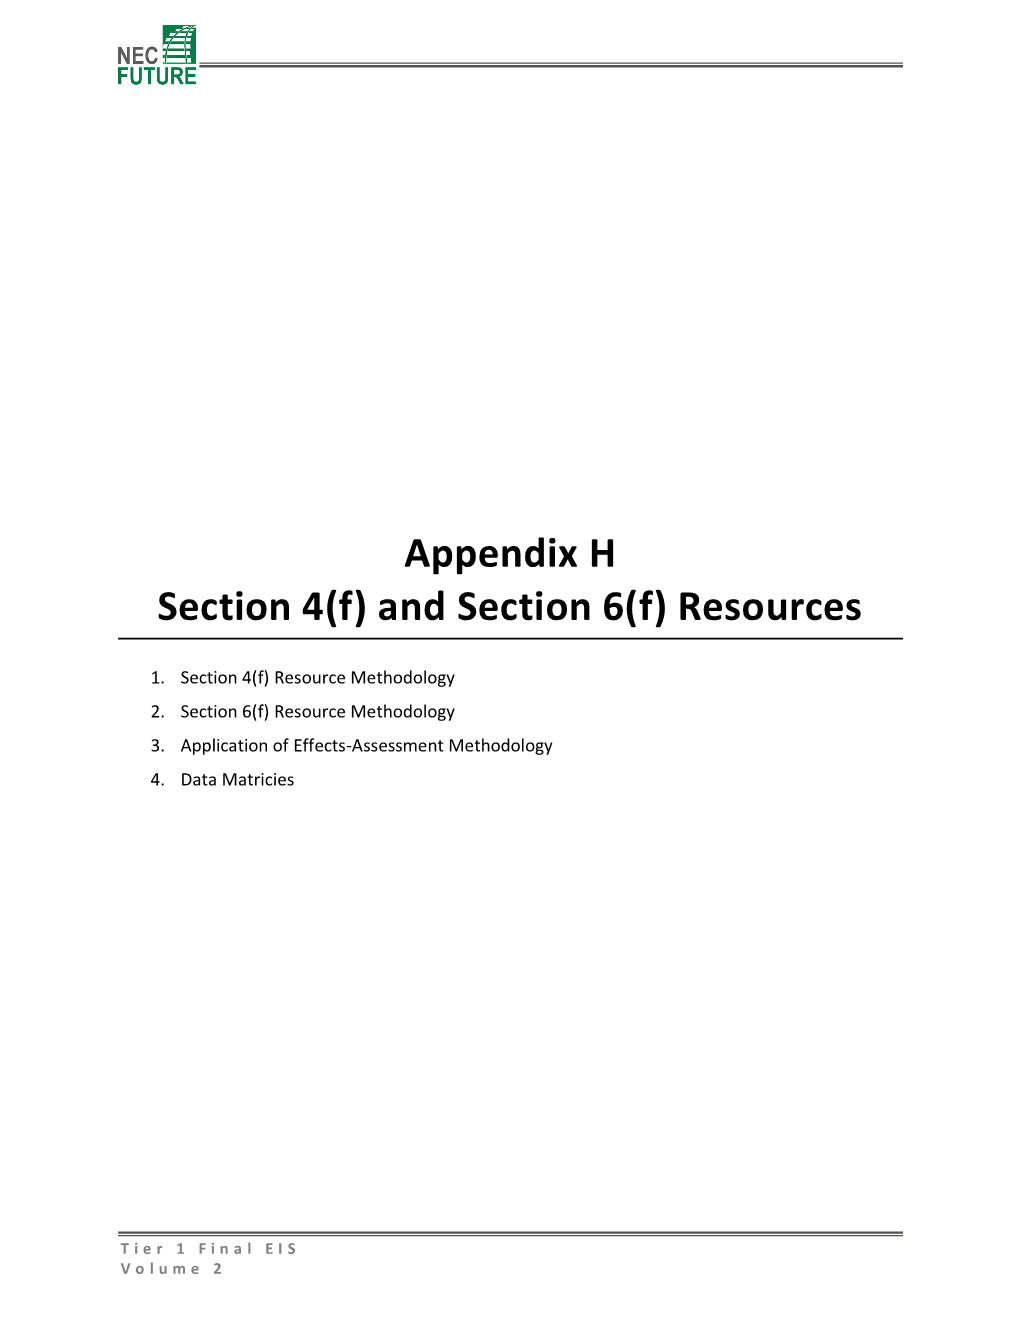 And Section 6(F) Resources